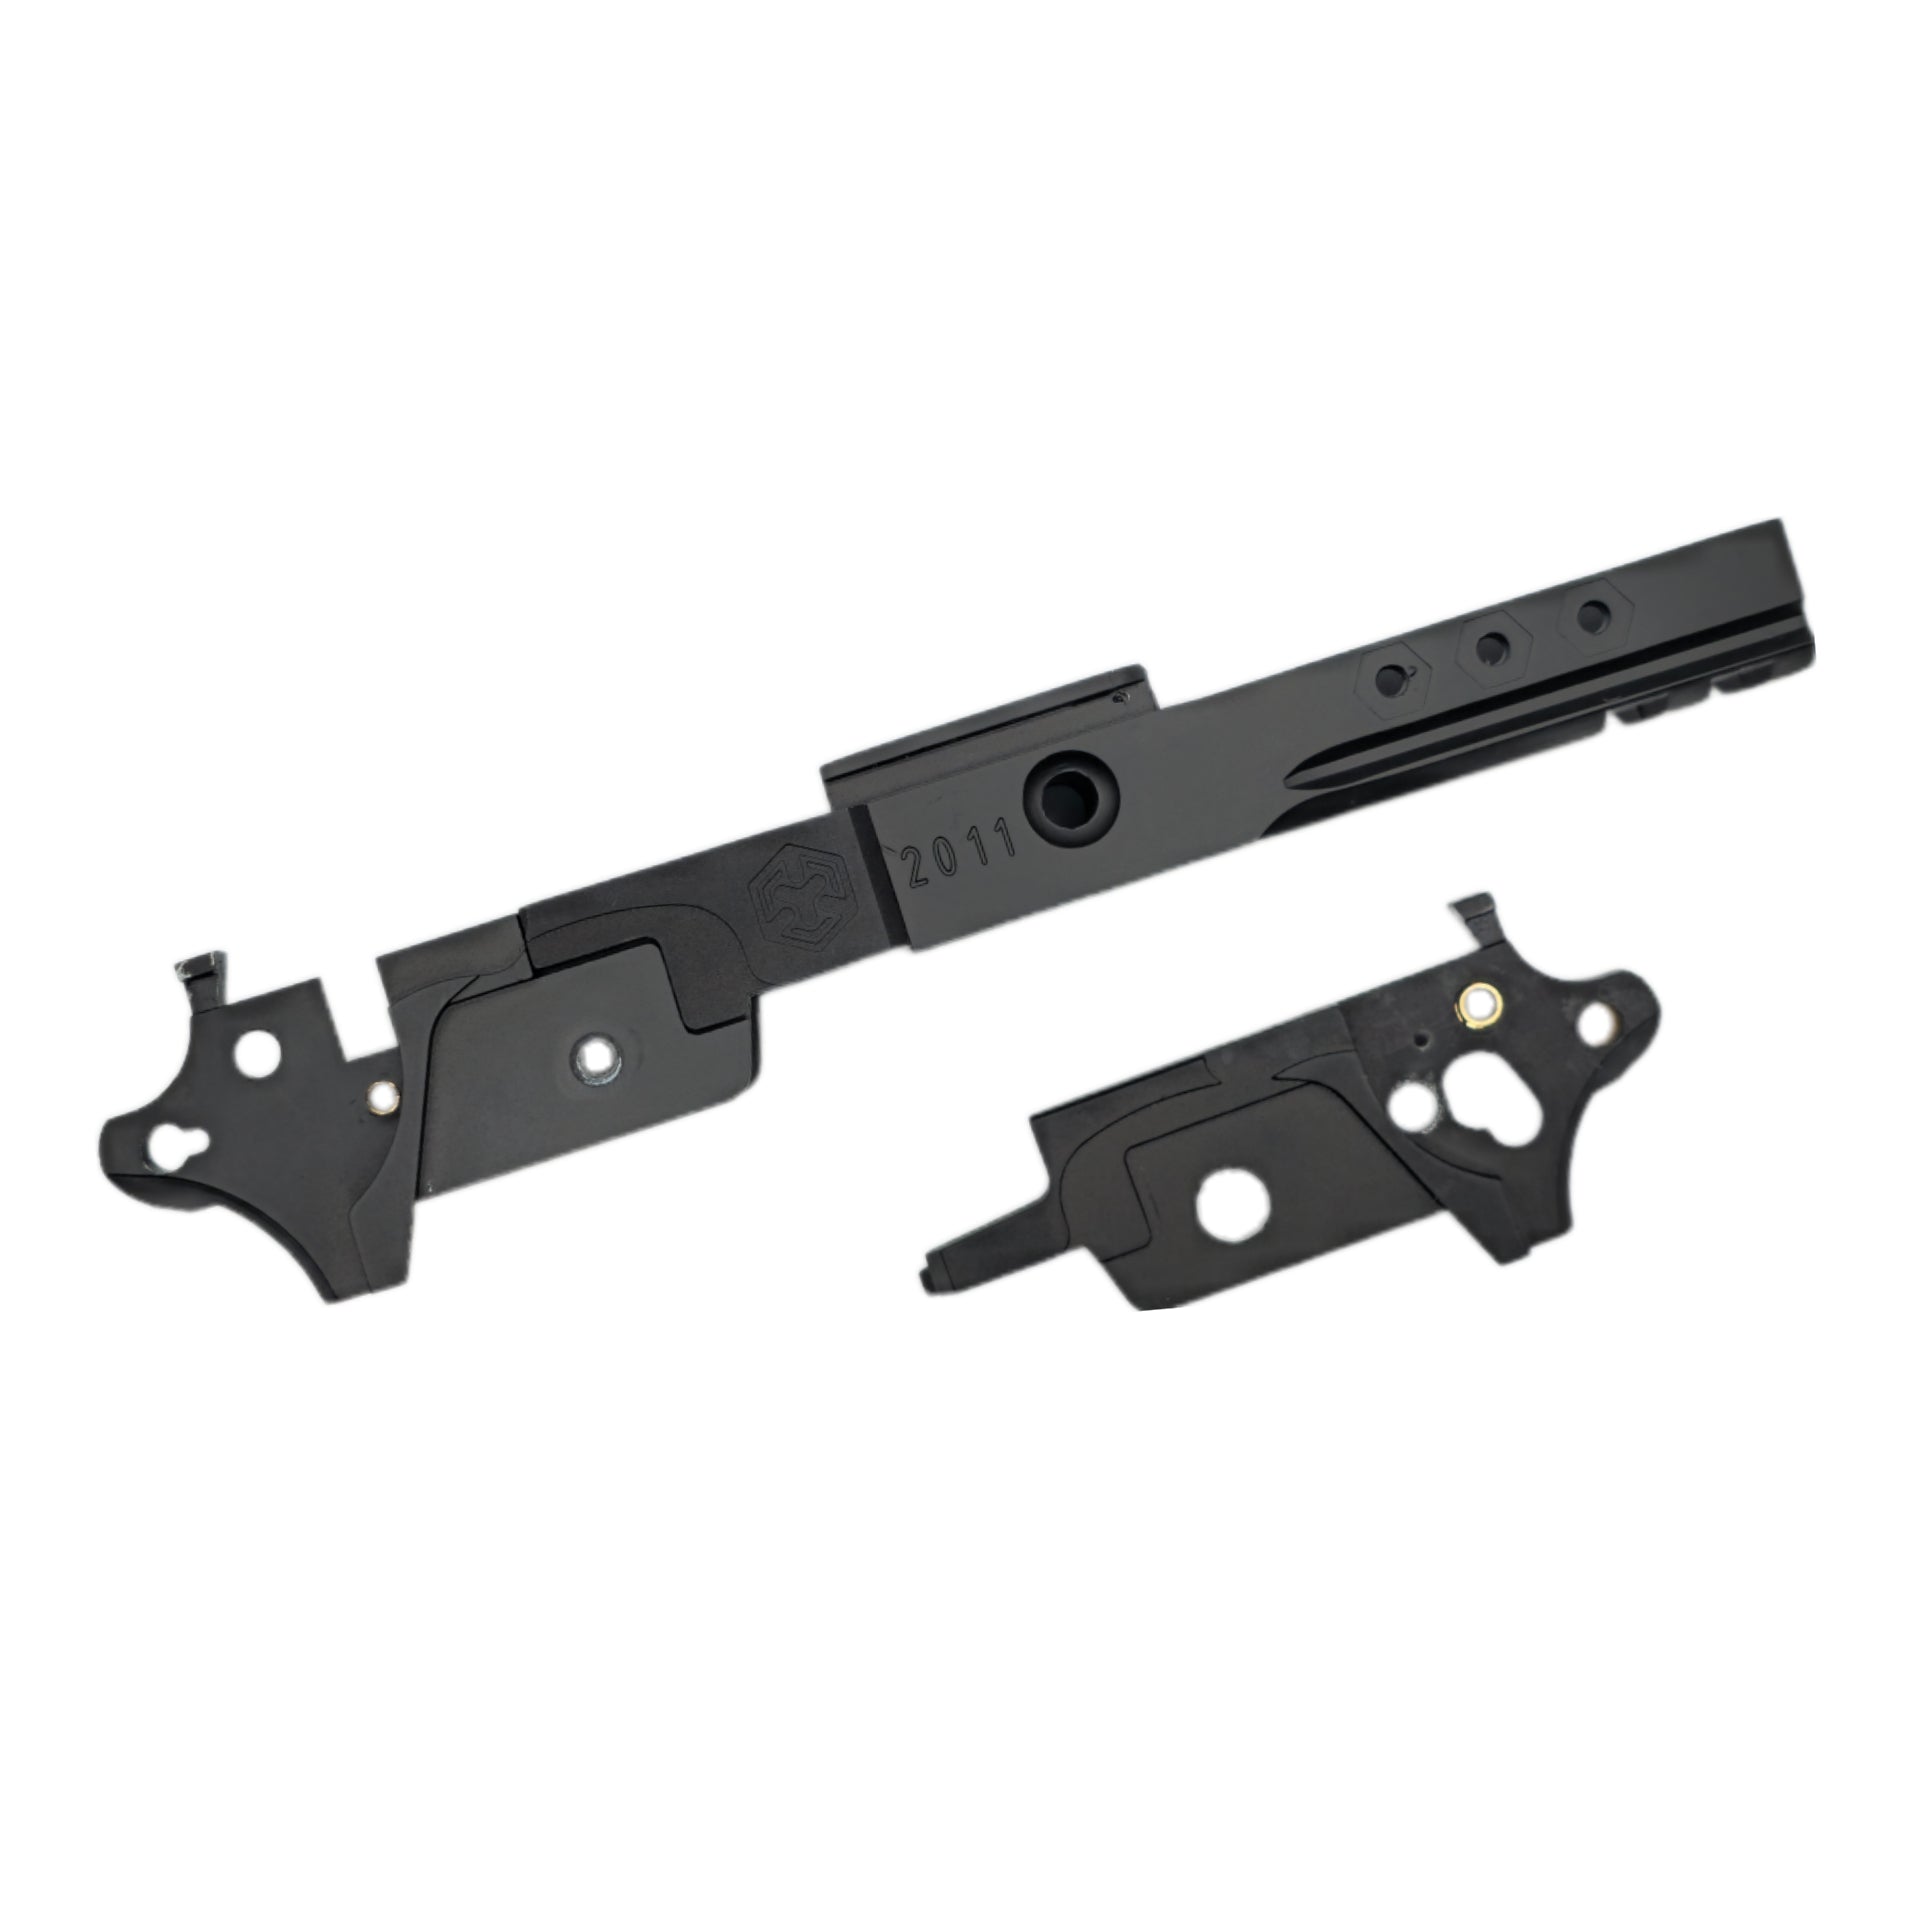 AW Hi-Capa Full Auto Series Replacement Part 216 229 - Frame Set